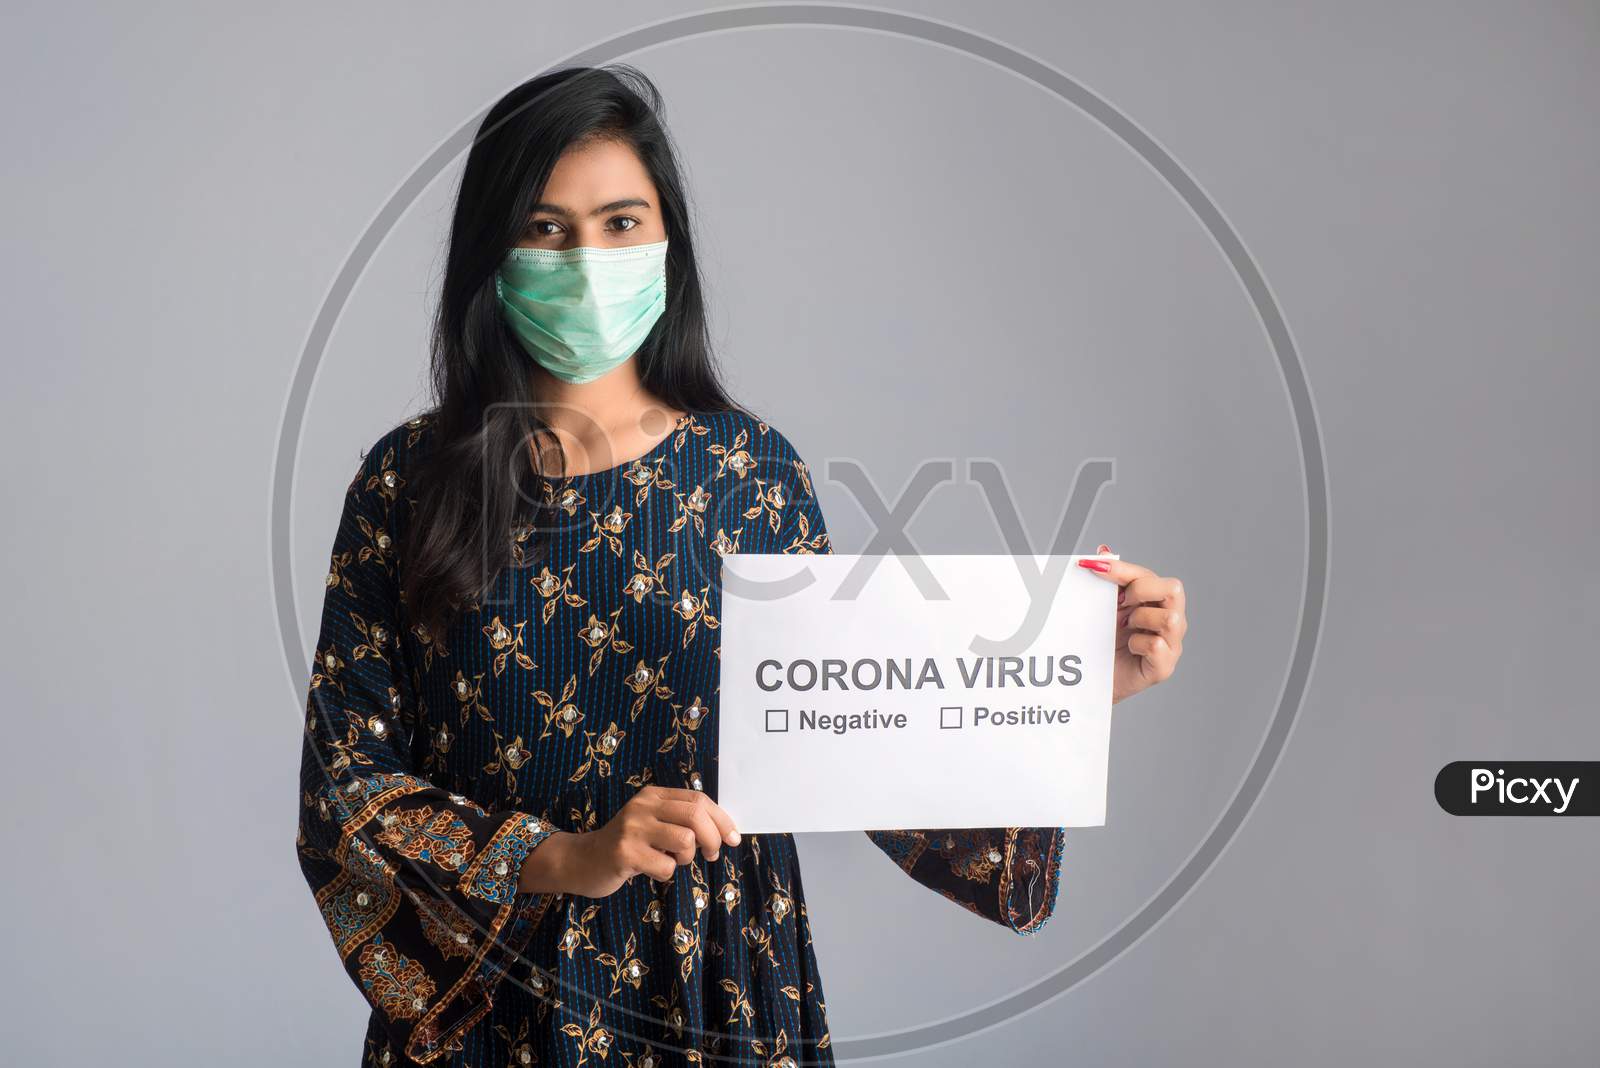 A Young Woman In A Medical Mask Holding A Board Of The Epidemic Of Coronavirus, Covid-19